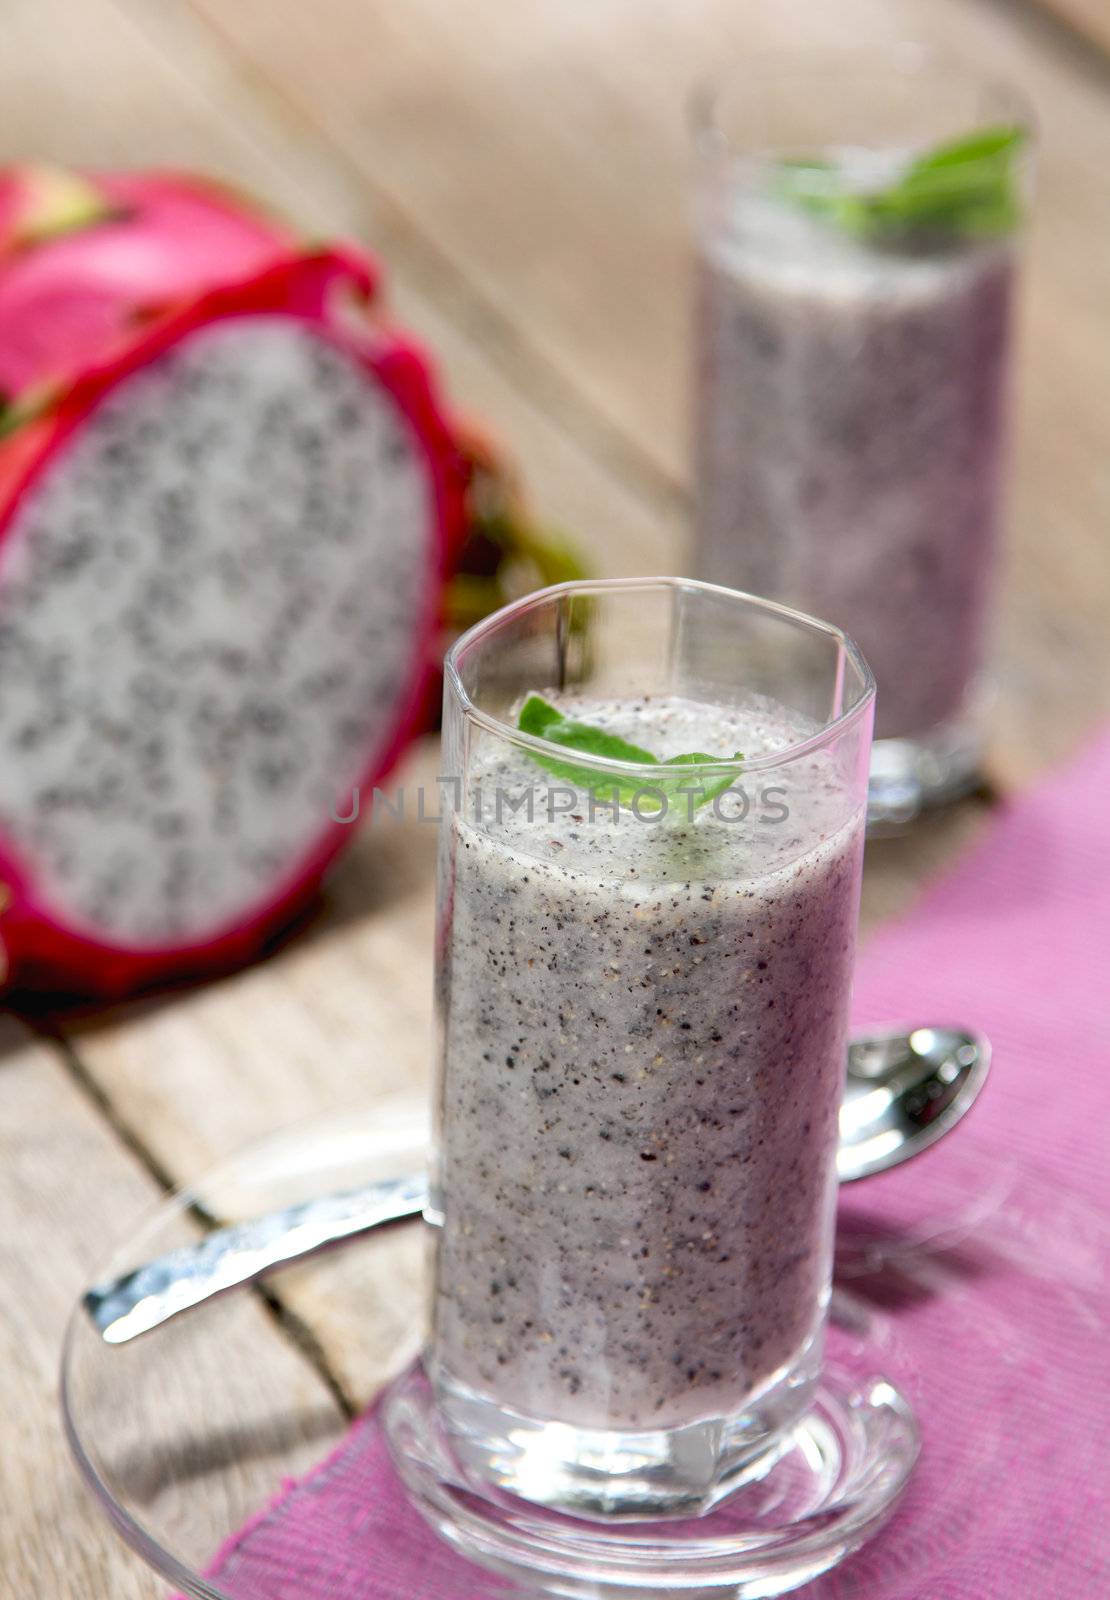 Dragon fruit smoothie [ Healthy drink ]